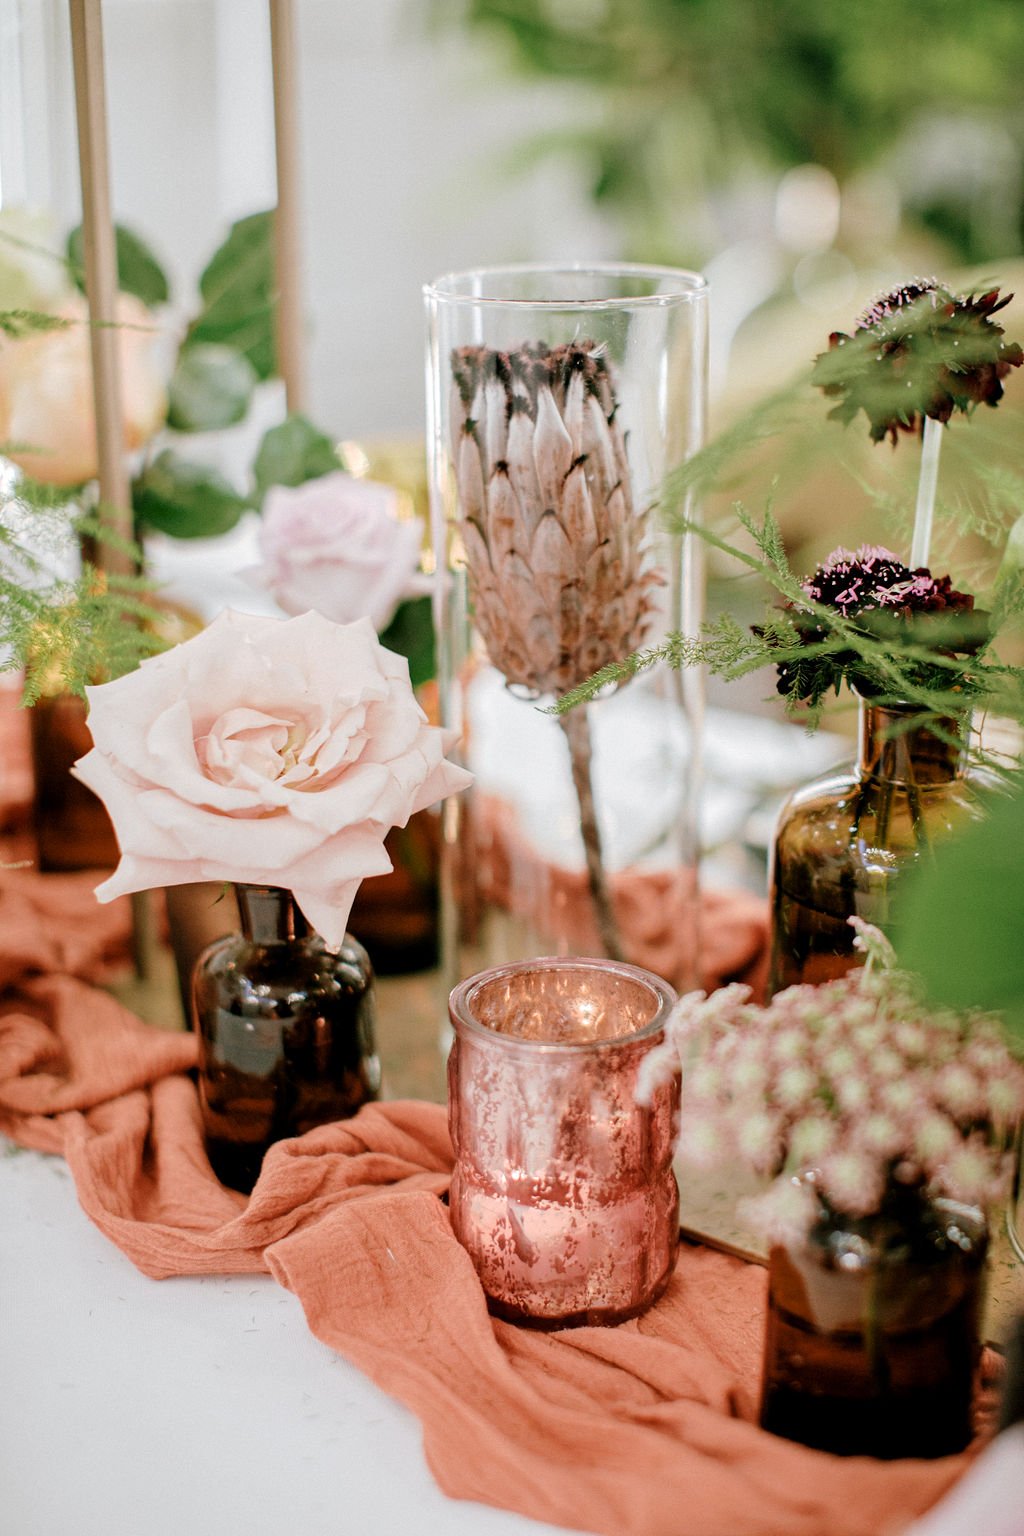 5-things-to-know-before-booking-your-wedding-florist-brought-to-you-by-savannah-wedding-planner-and-savannah-florist-ivory-and-beau-savannah-plant-riverside-district-savannah-wedding-savannah-bridal-shop-maggie-sottero-made-wiith-love-bridal-14.jpg